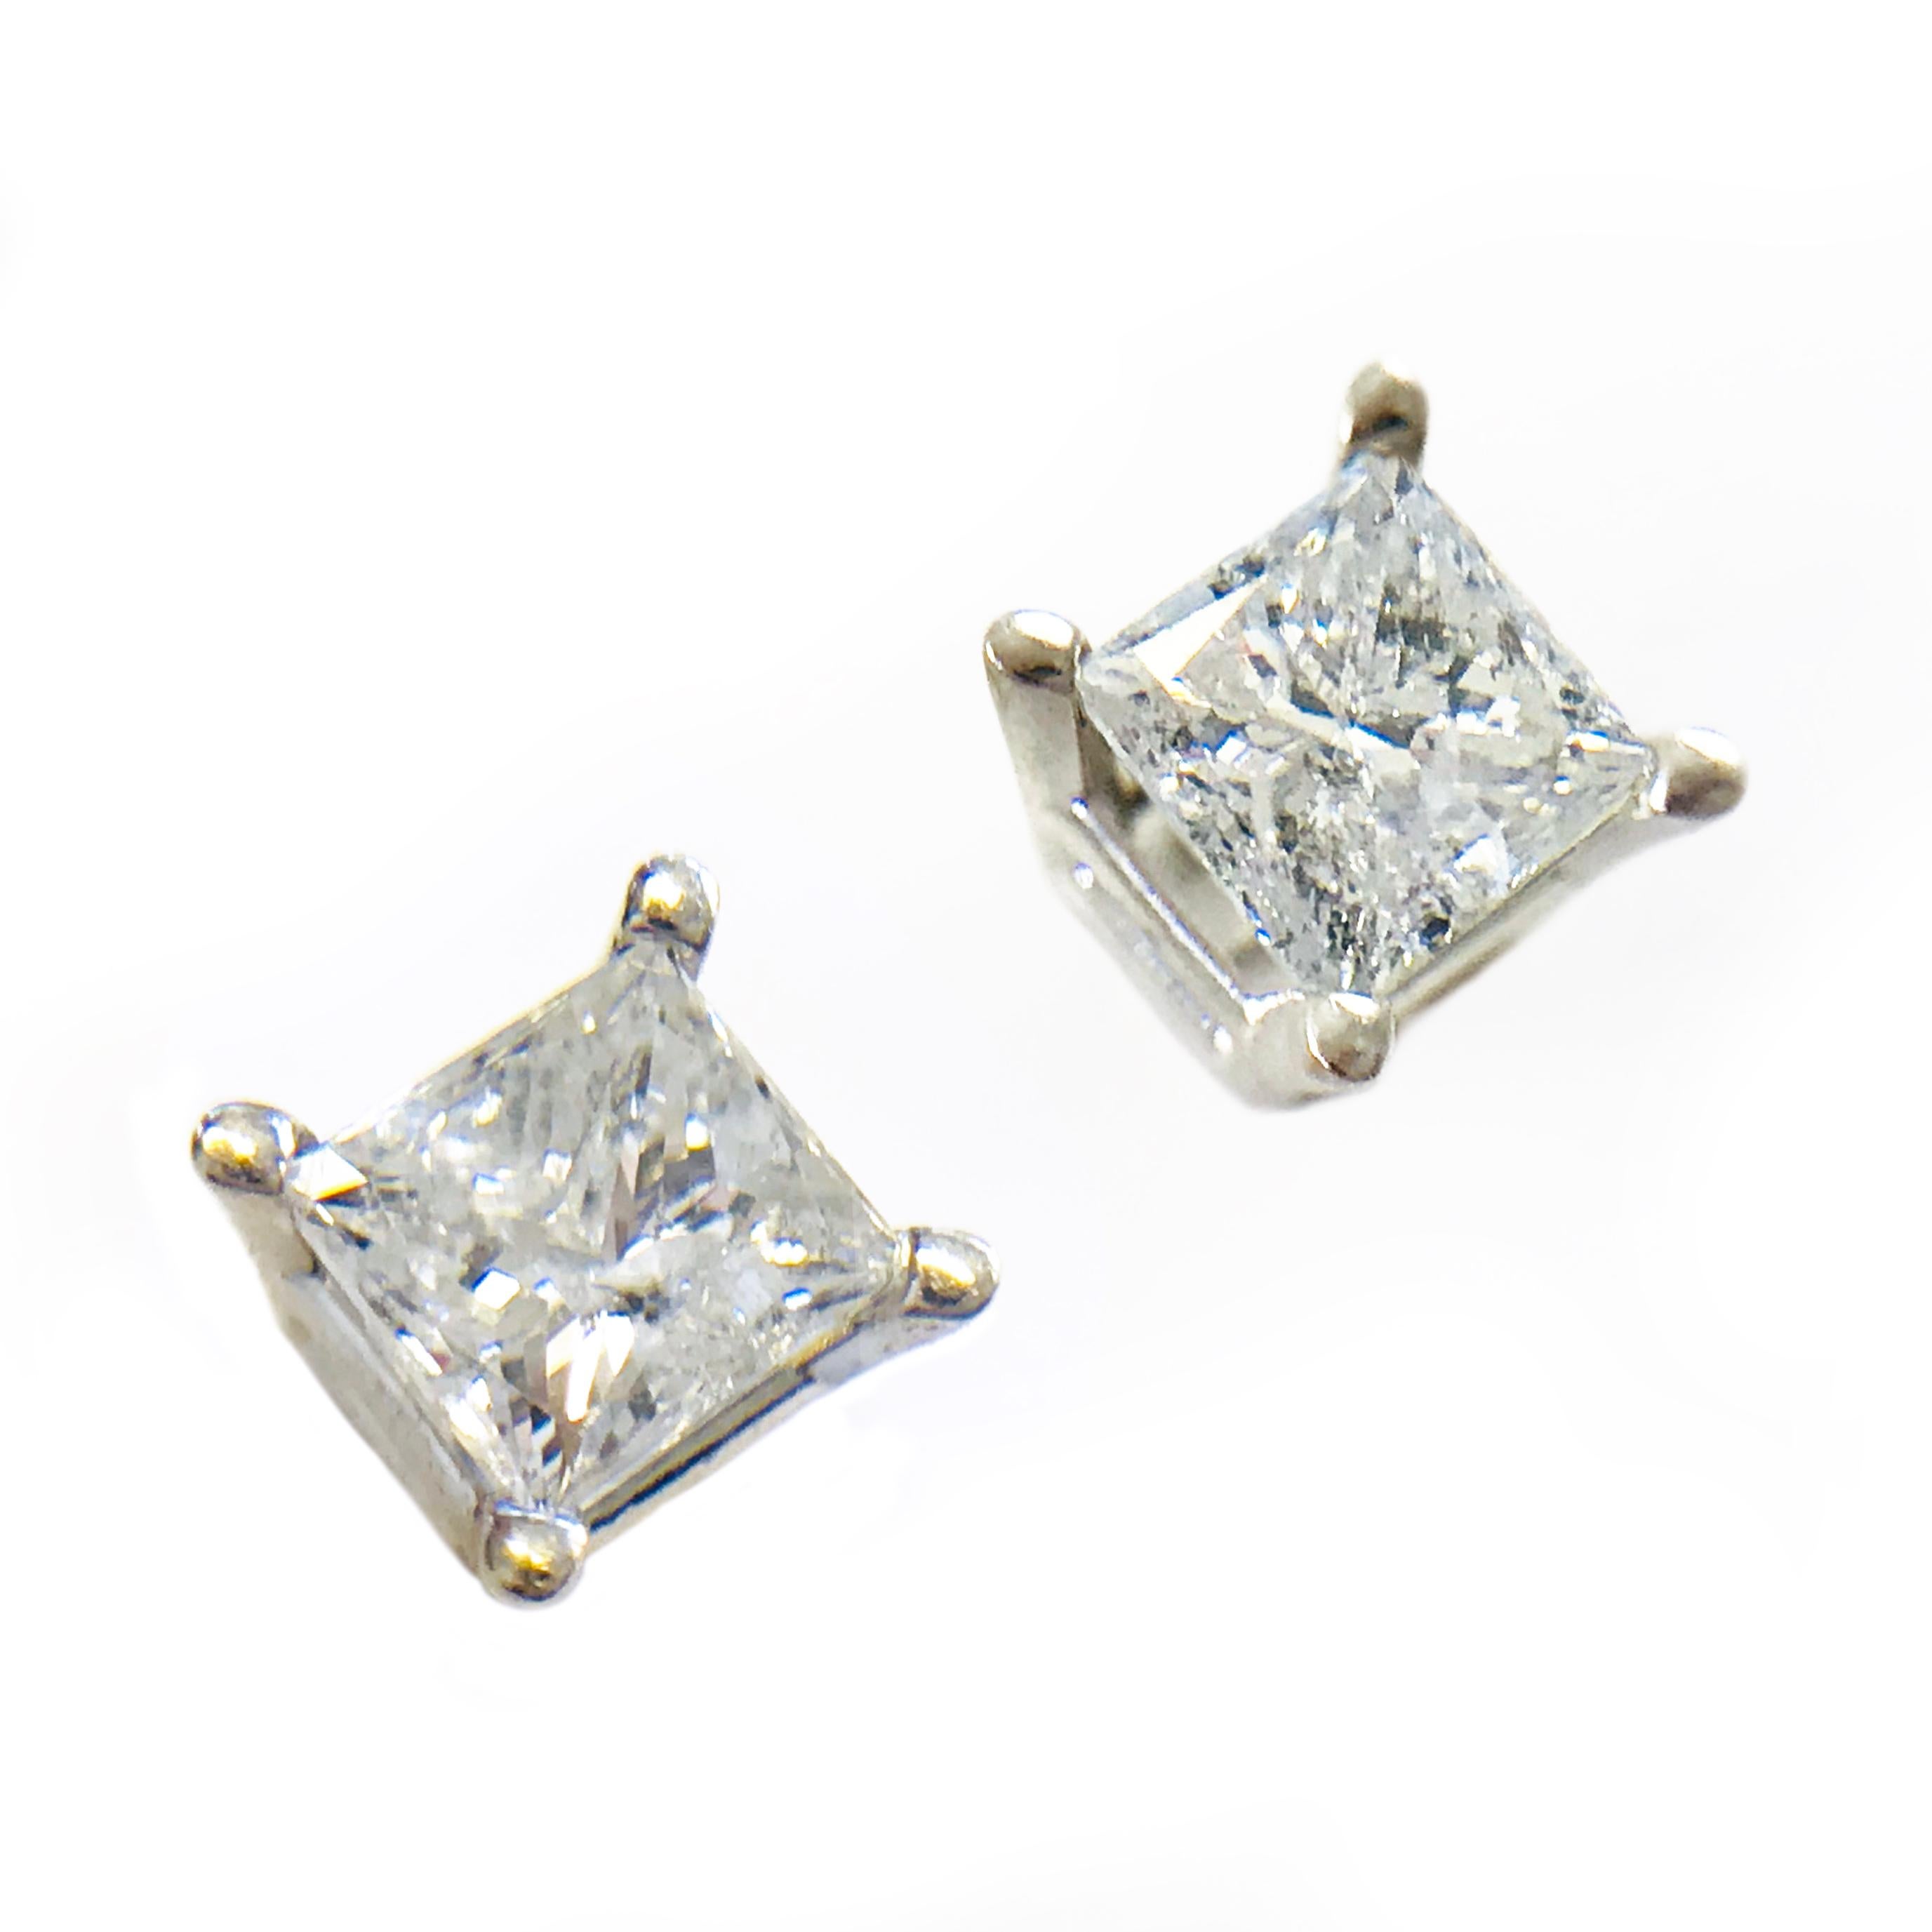 Classic diamond studs. 14 Karat Princess-Cut Diamond Earrings. Four prong set in white gold baskets, the diamonds measure 4.58 x 4.66mm and 4.33 x 4.64mm for a approximate weight of 1.00ctw. The diamonds are I1 (G.I.A.) in clarity and G-H (G.I.A.)